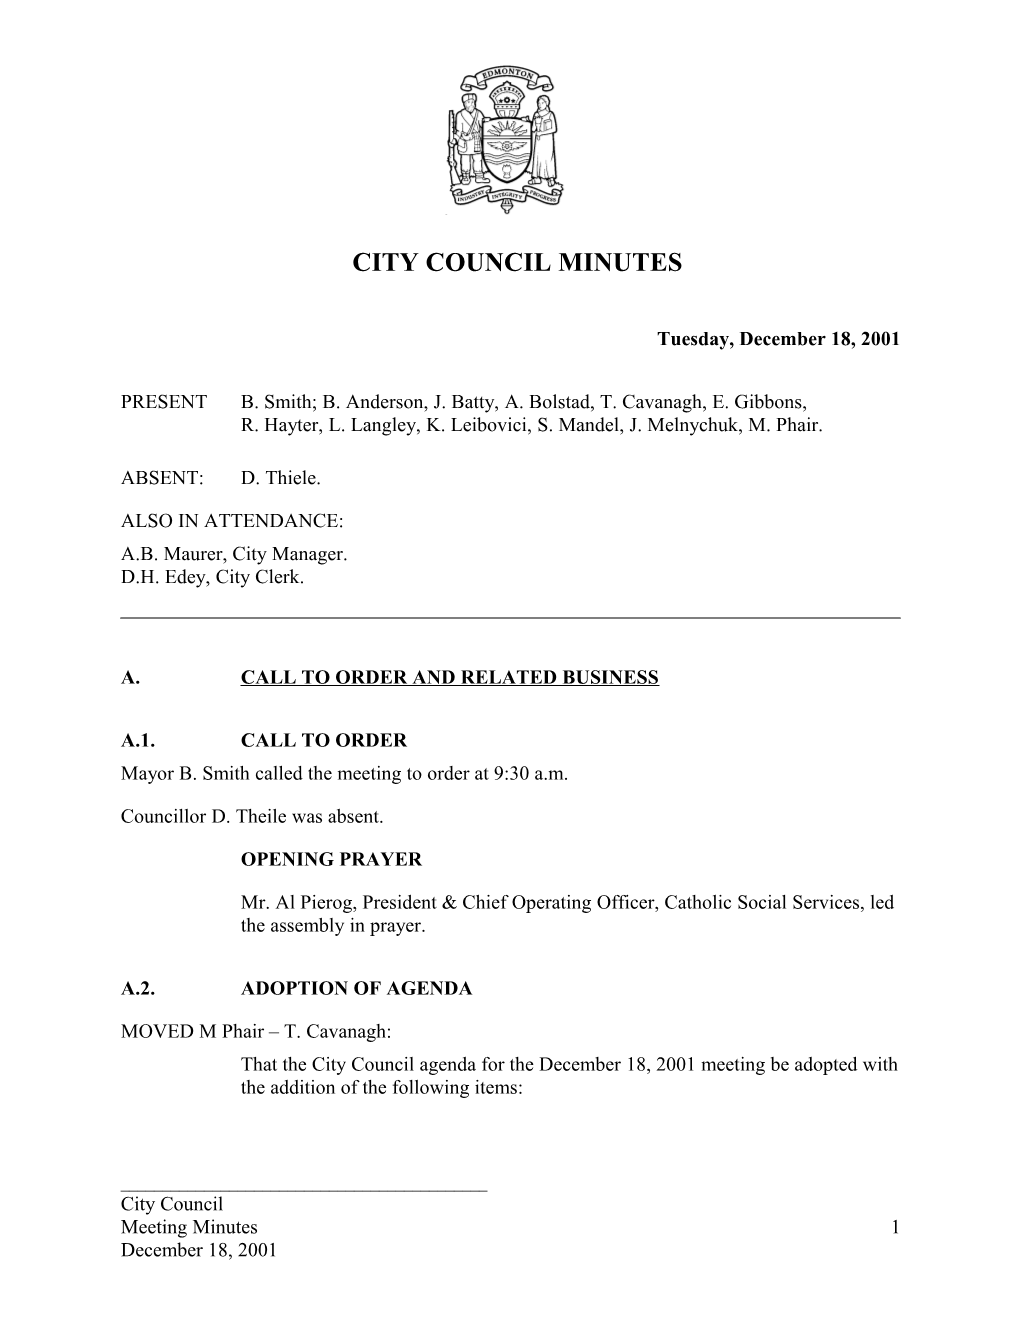 Minutes for City Council December 18, 2001 Meeting